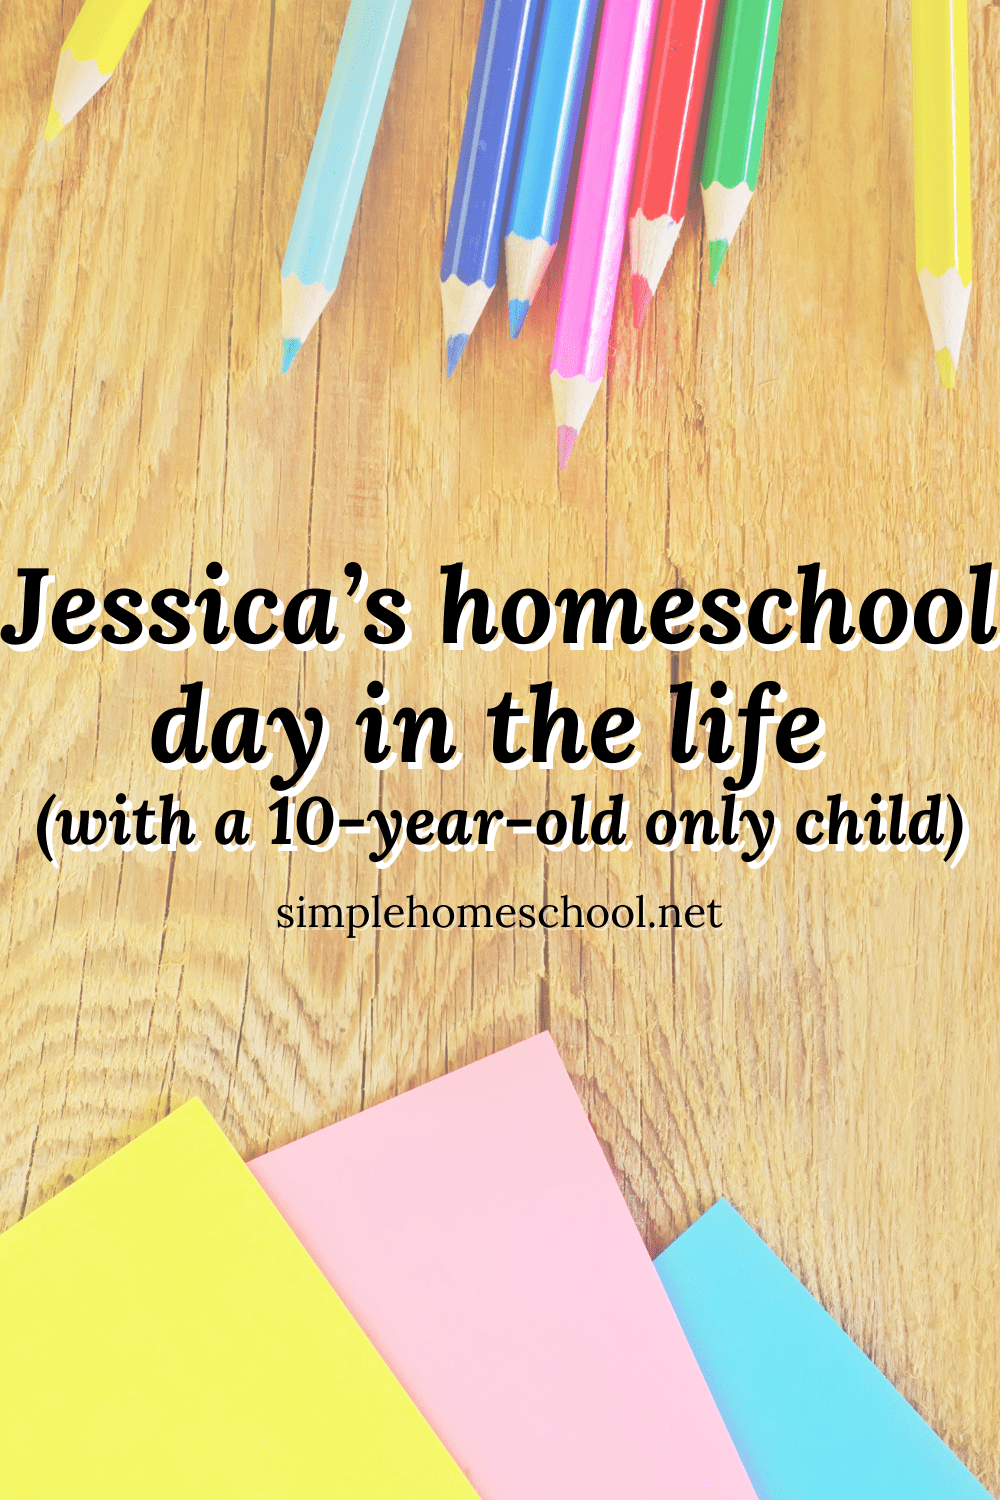 Jessica's homeschool day in the life 